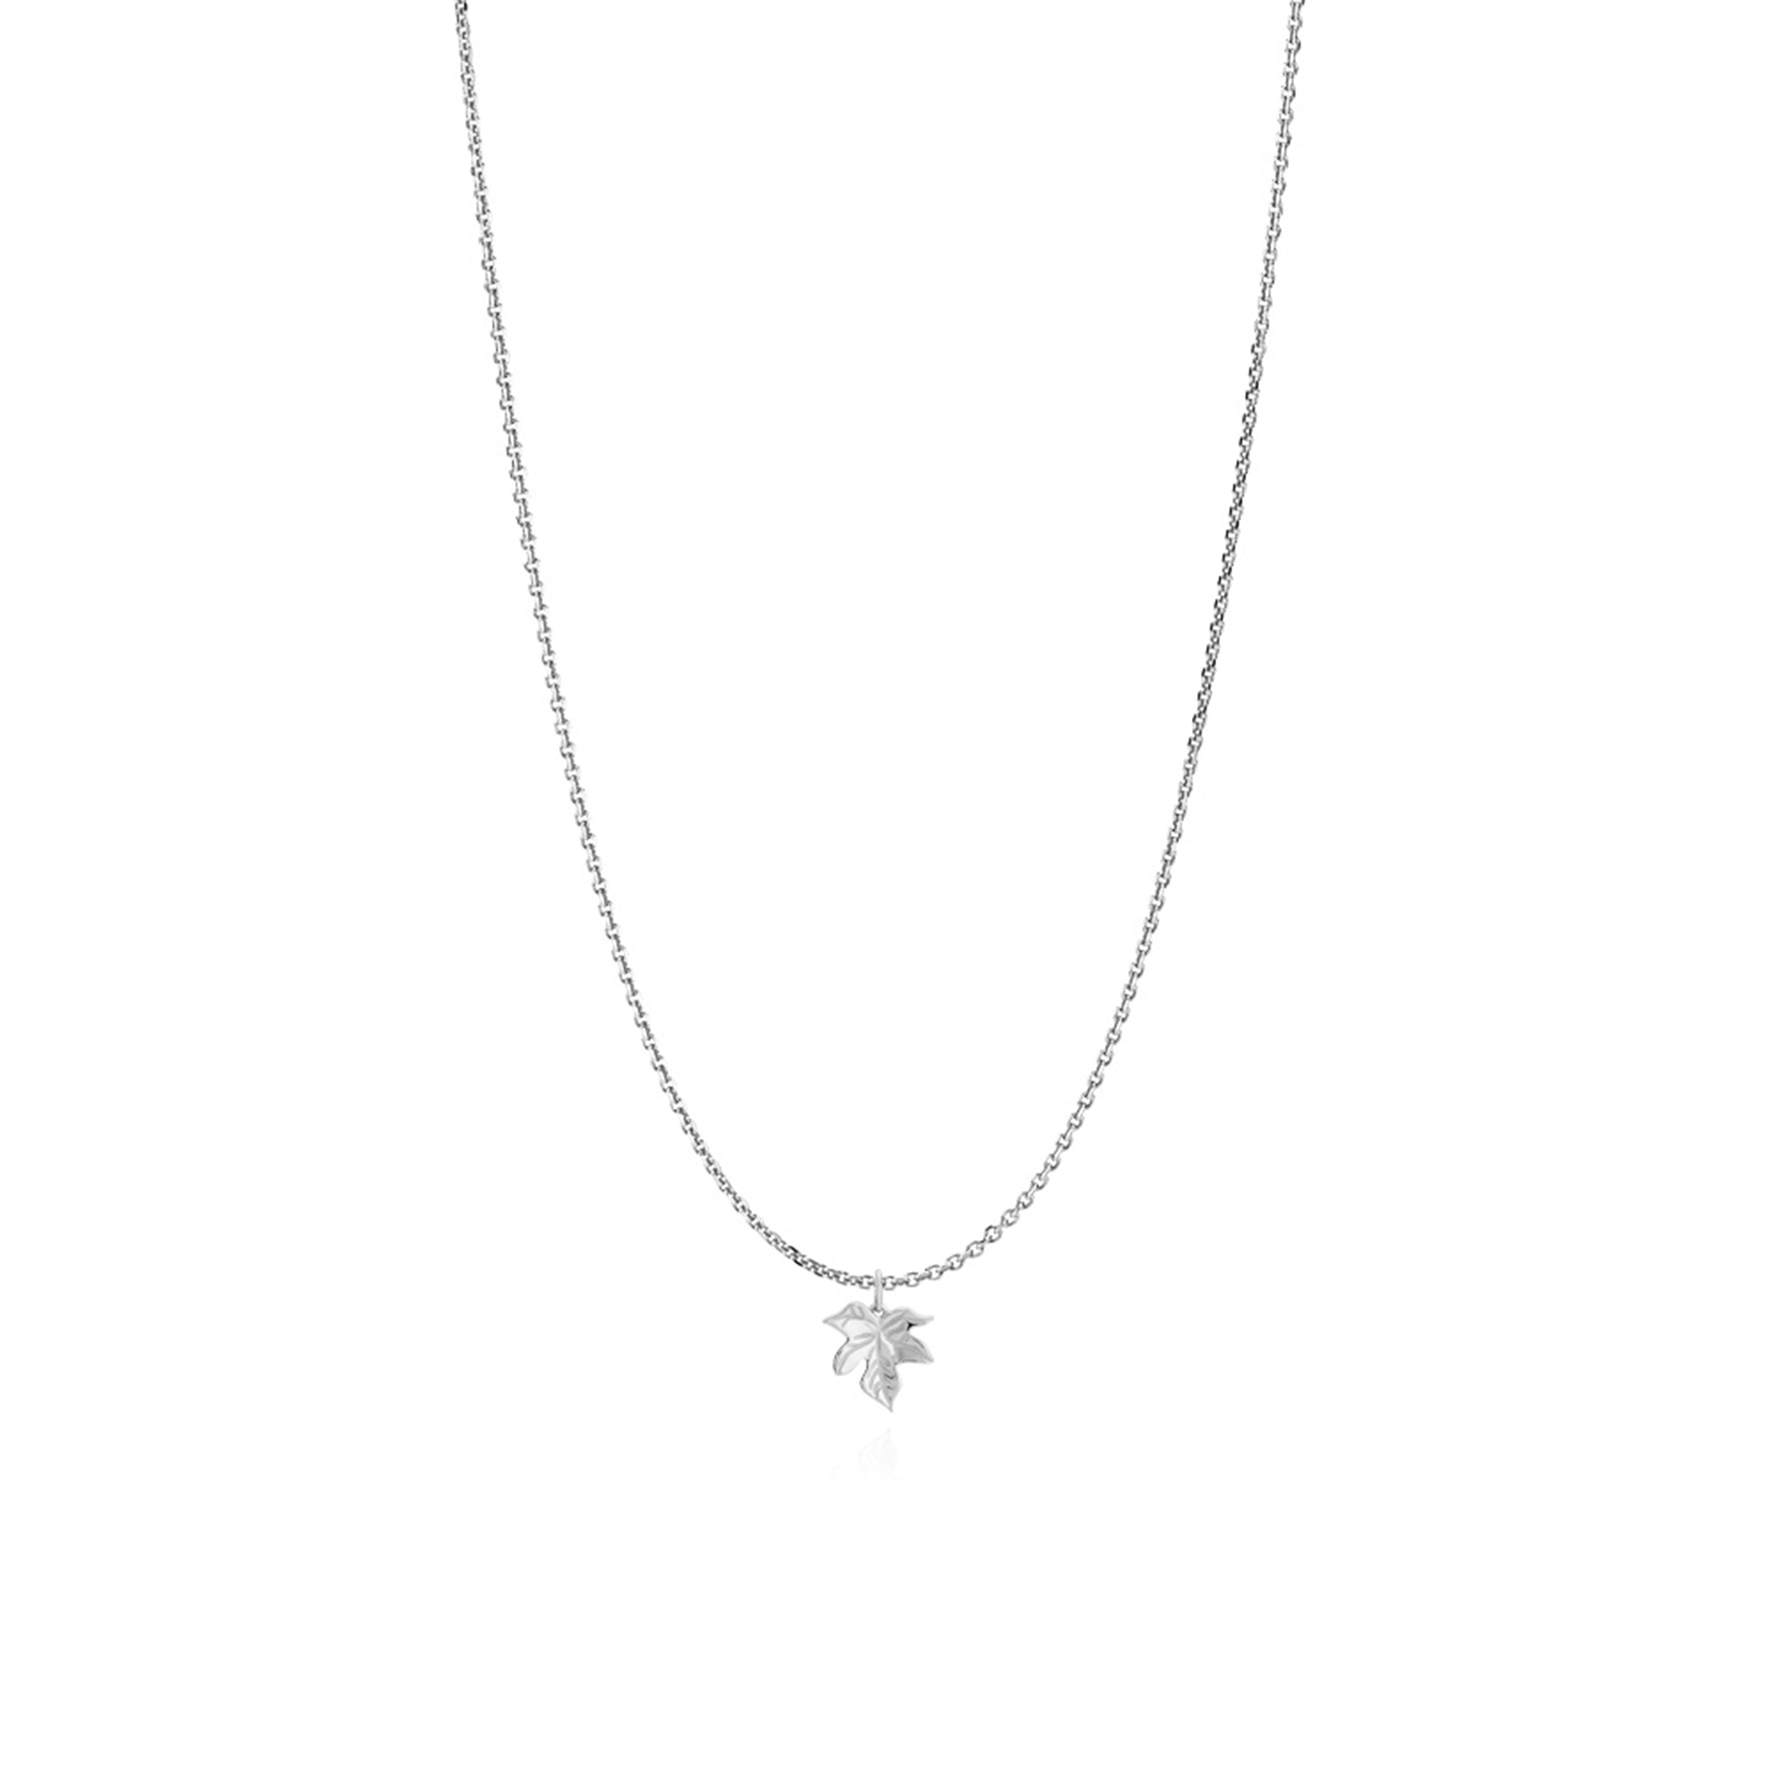 Caley Necklace With Leaf von Izabel Camille in Silber Sterling 925